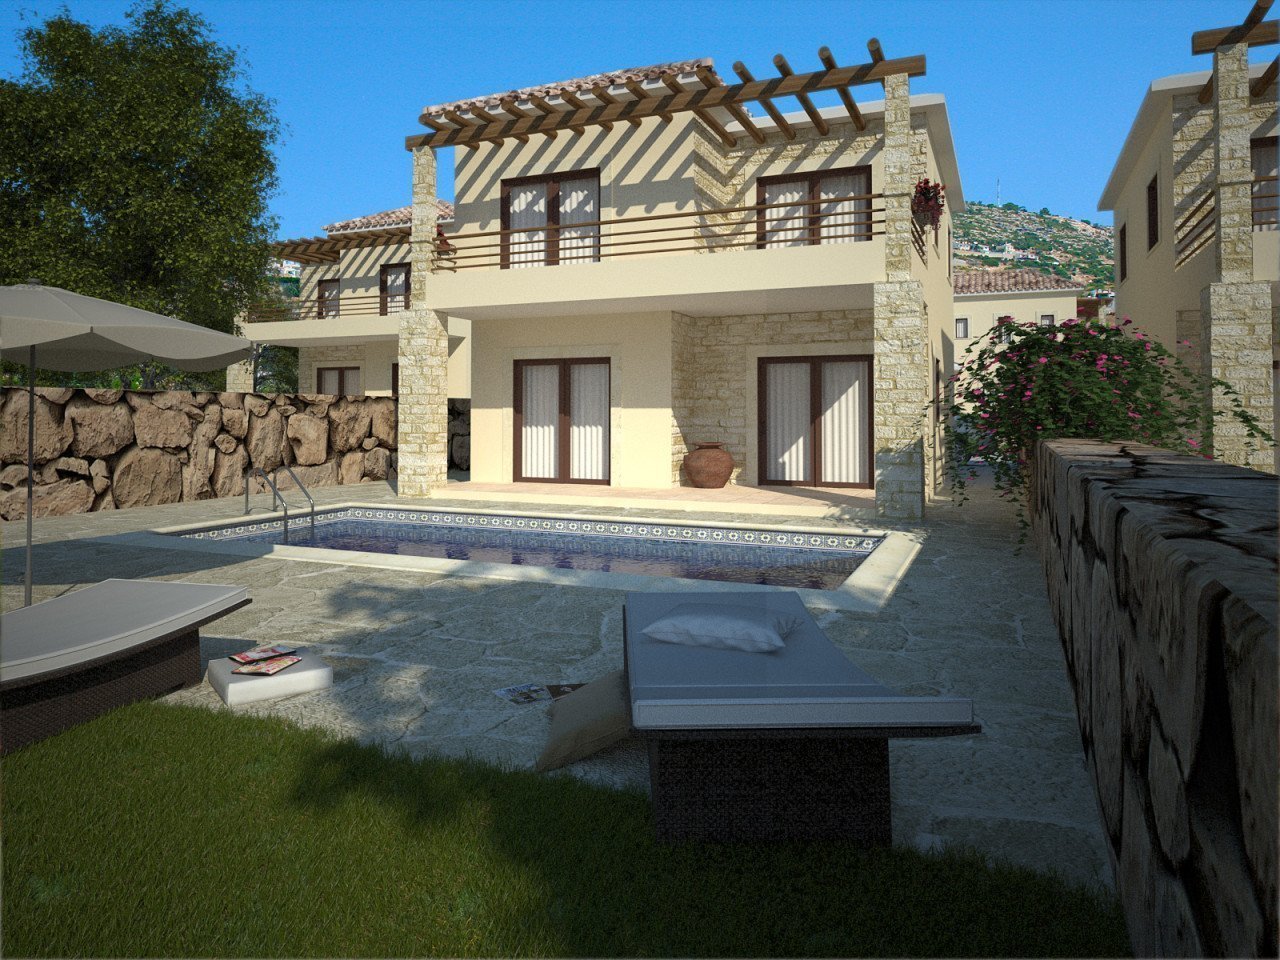 Property for Sale: Investment (Project) in Pegeia, Paphos  | Key Realtor Cyprus